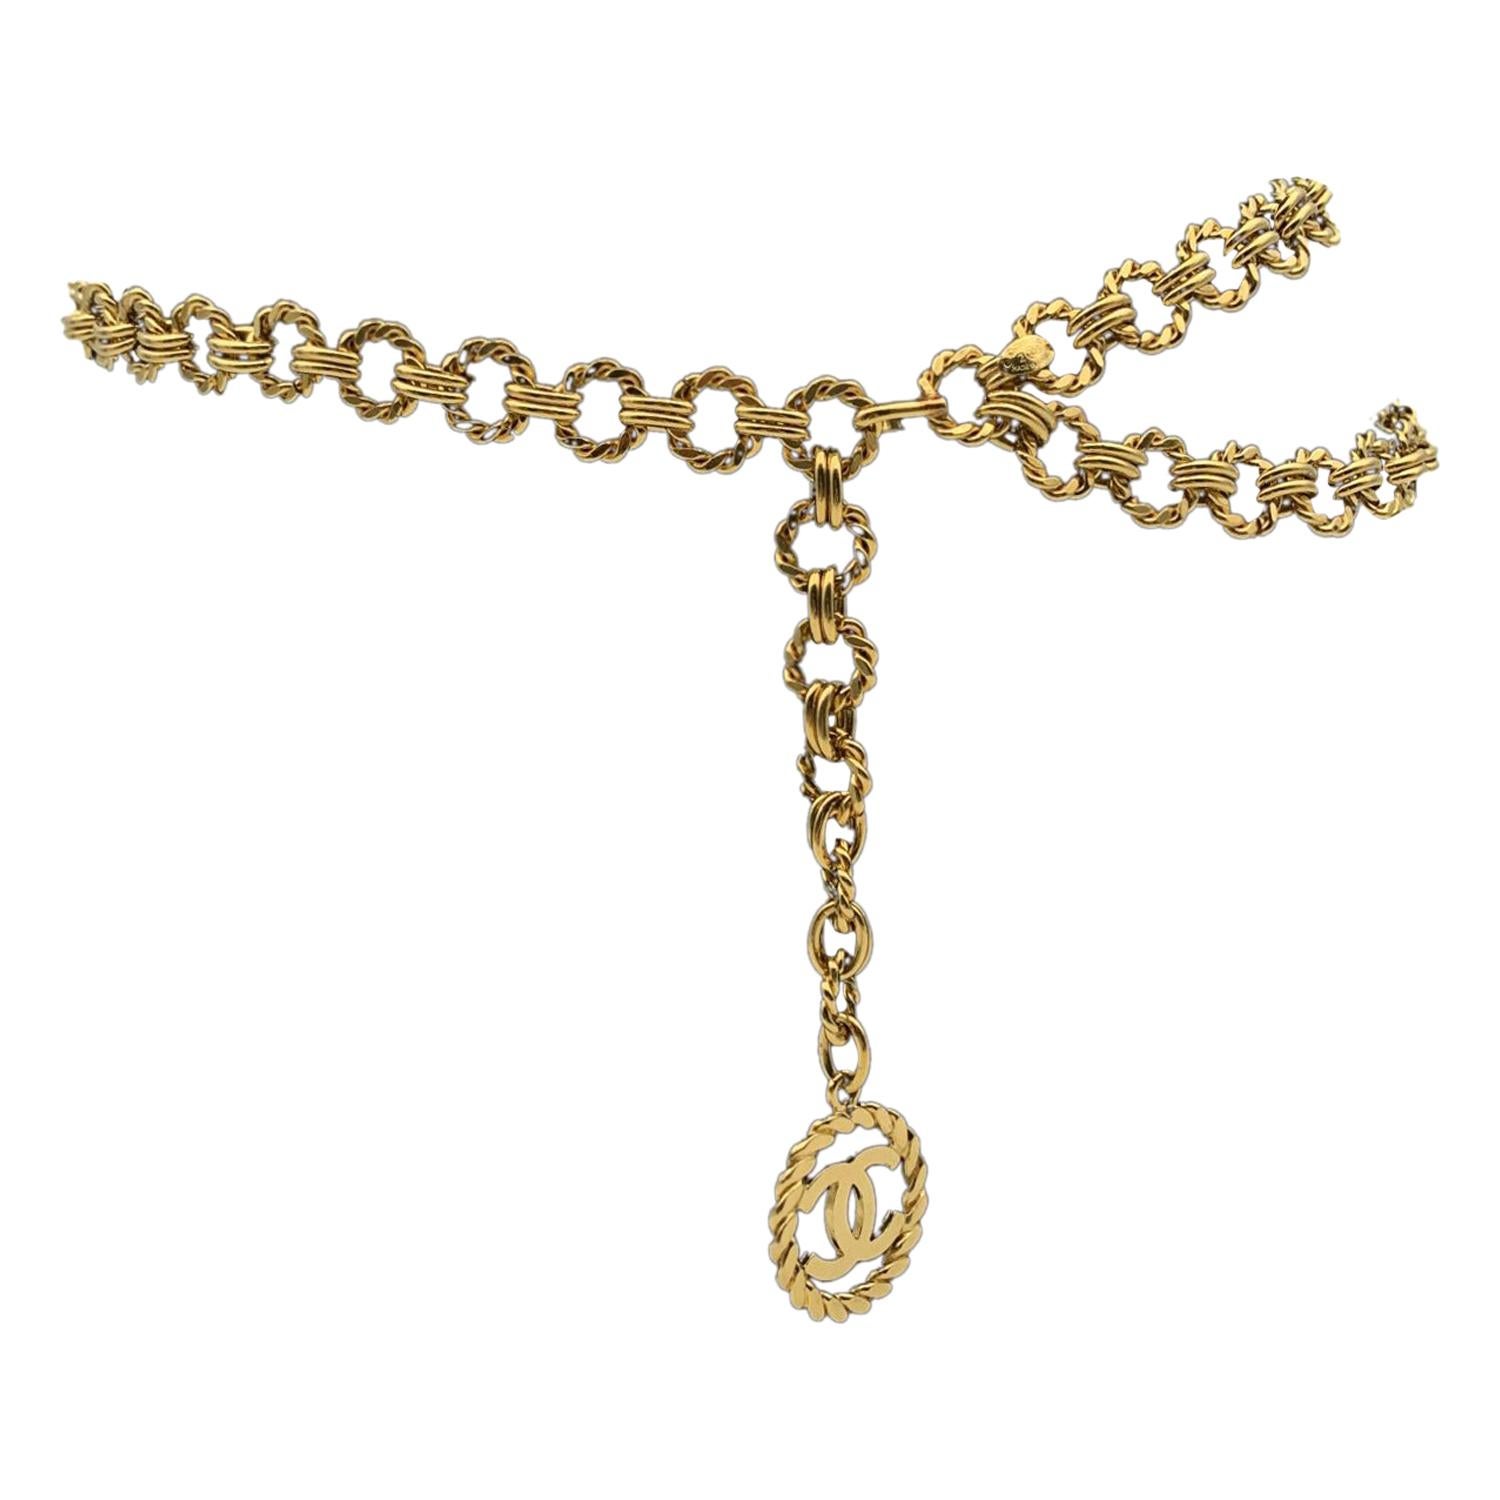 Chanel Vintage Gold Metal Ring Chain Belt with CC Pendant